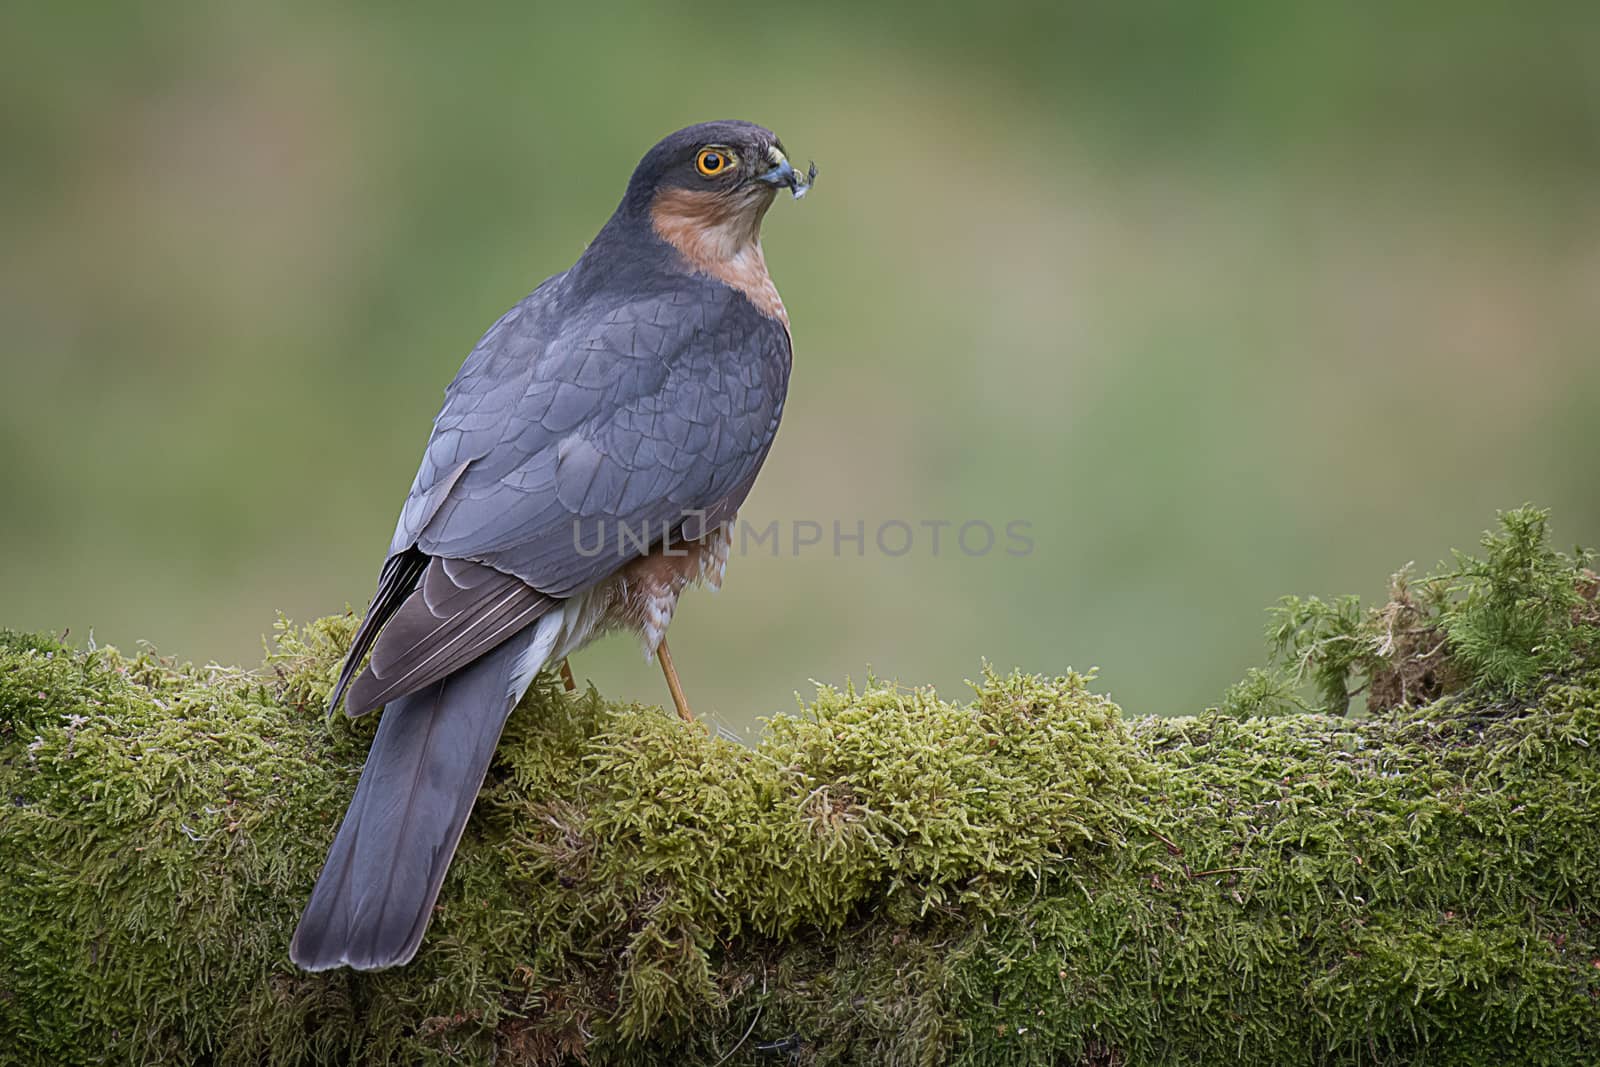 A portrait of an alert male sparrowhawk perched on a wooden tree trunk covered with lichen and a feather on his beak